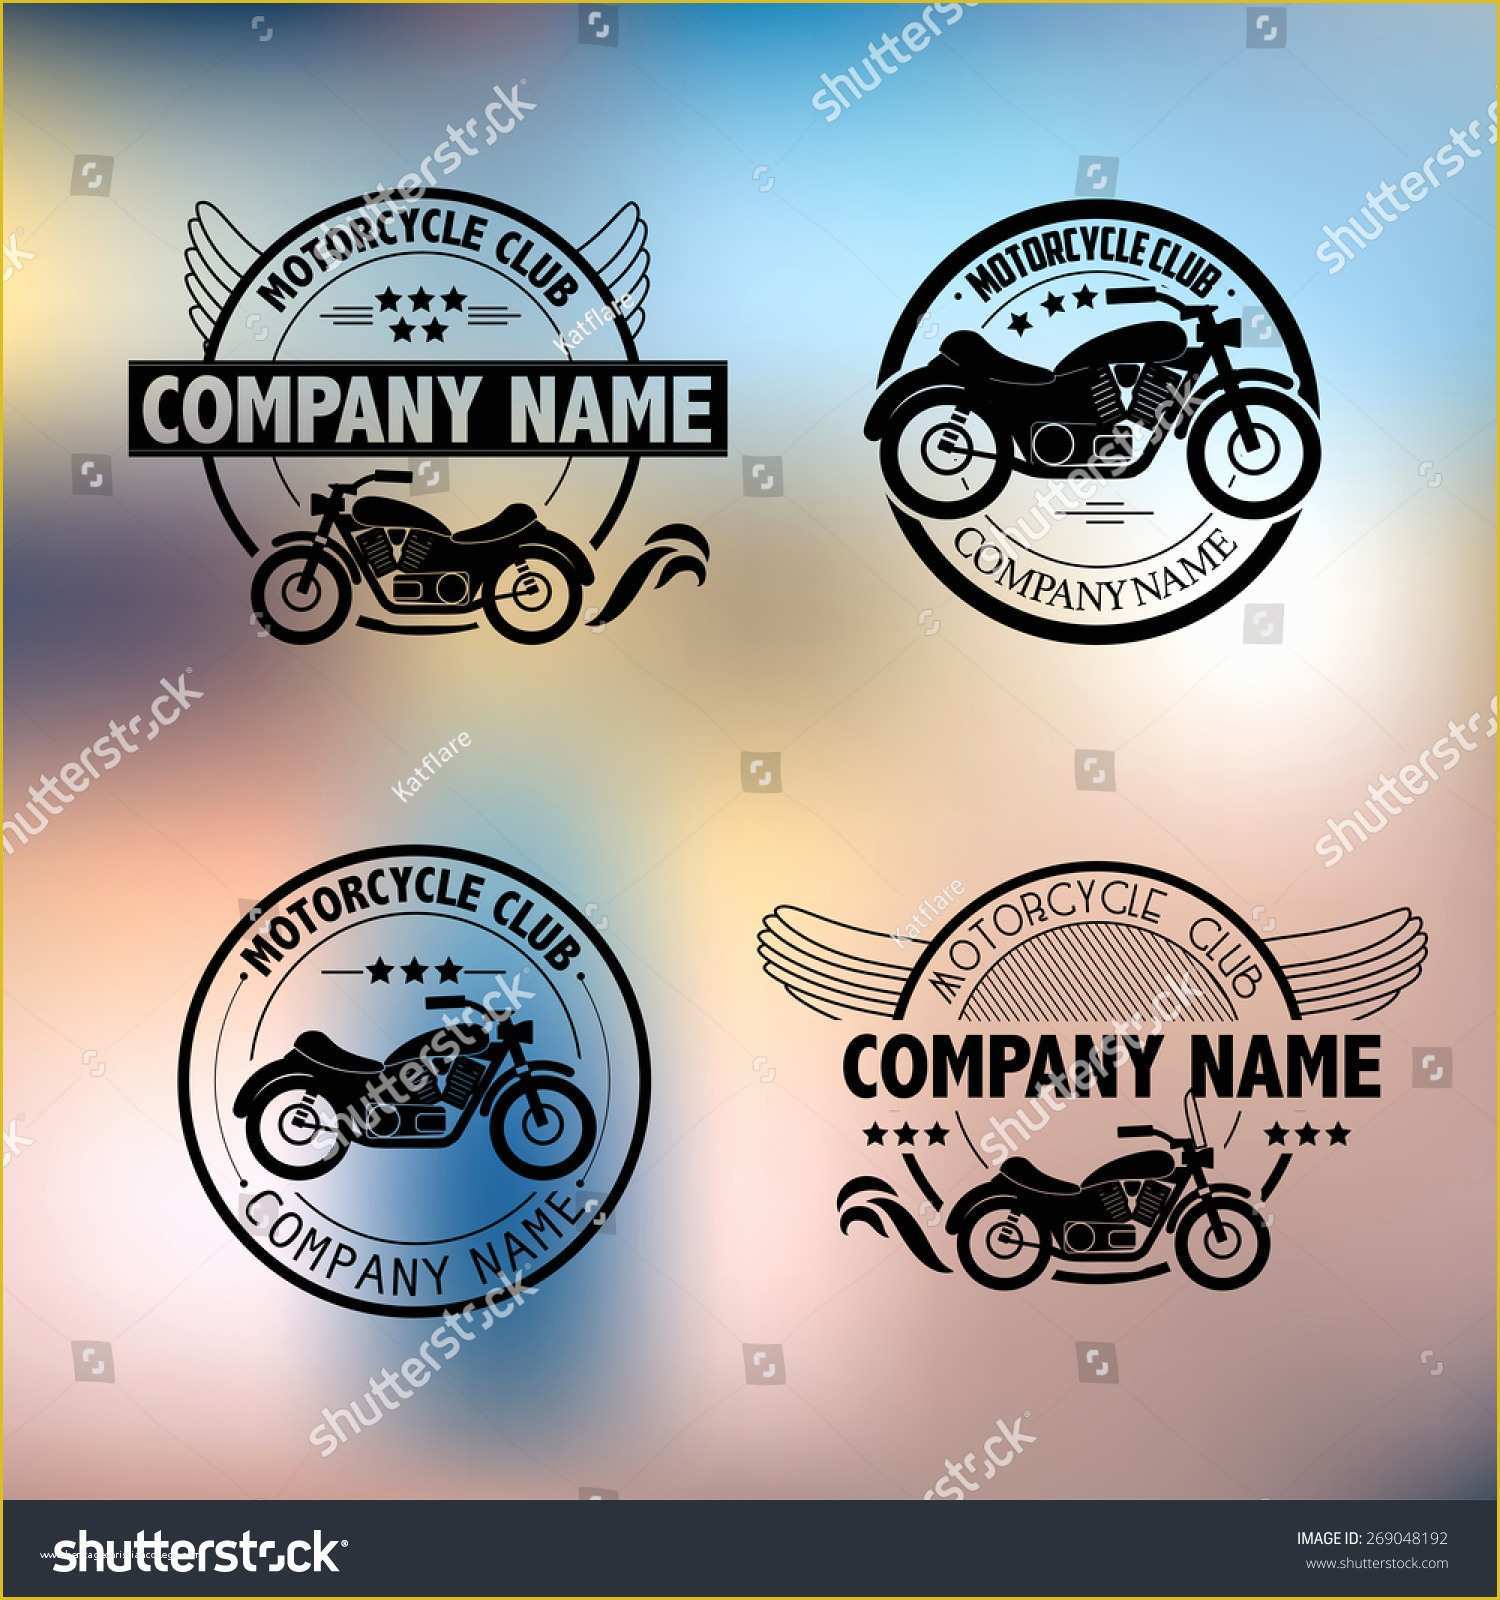 45 Motorcycle Club Logo Template Free